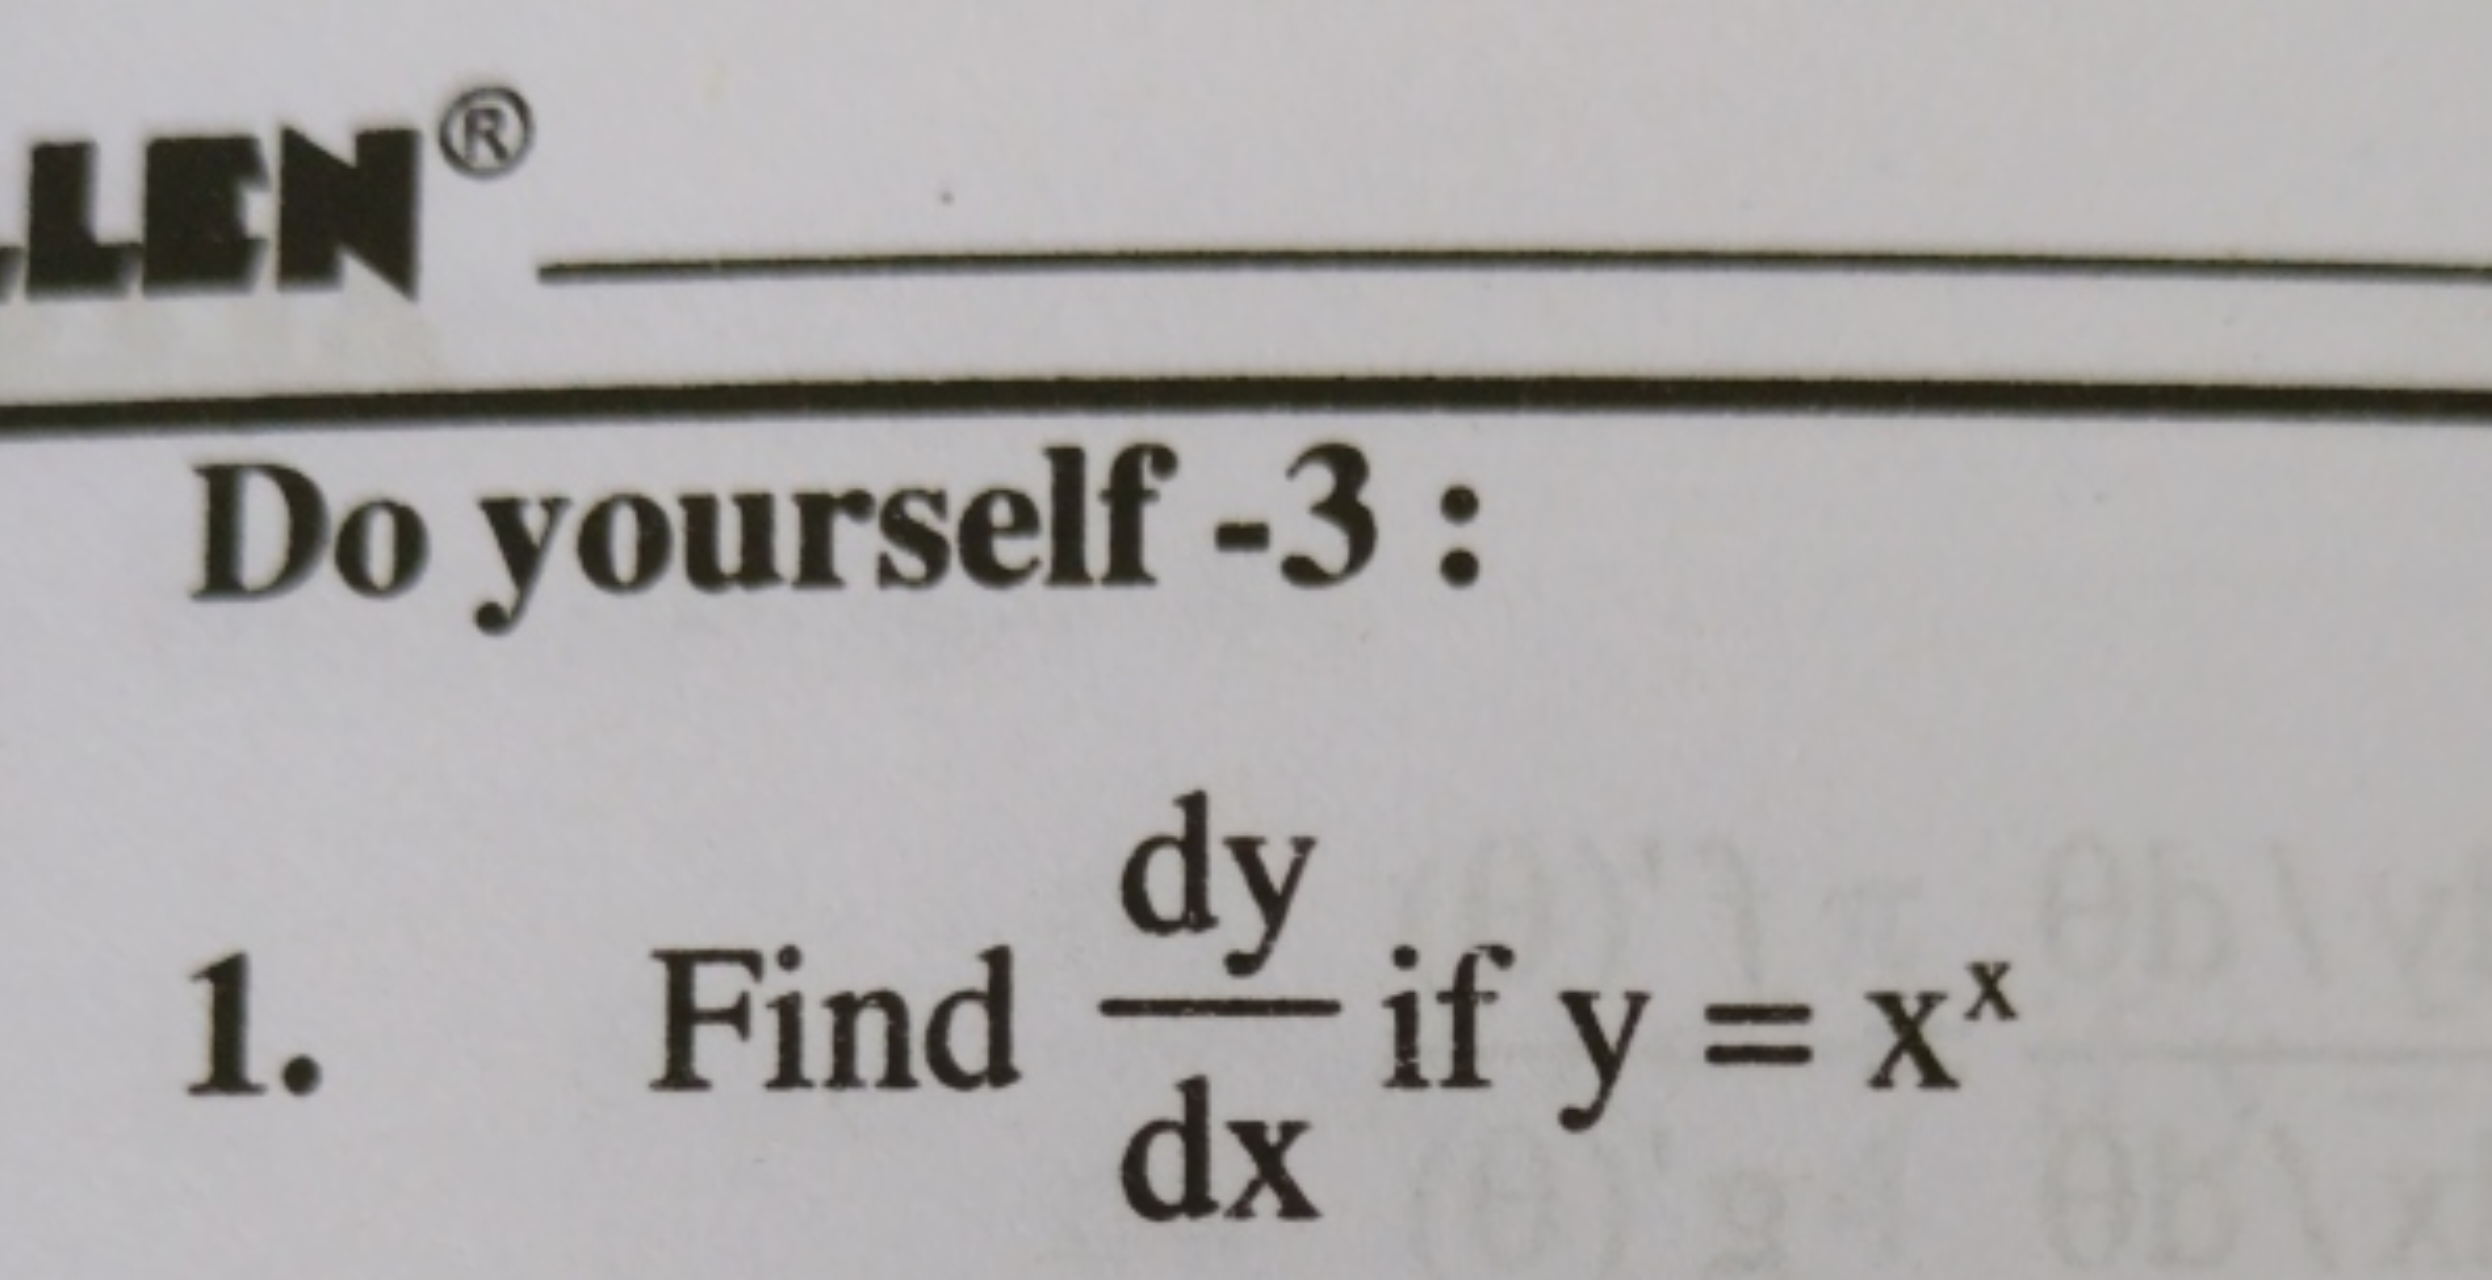 INI®
Do yourself −3 :
1. Find dxdy​ if y=xx
